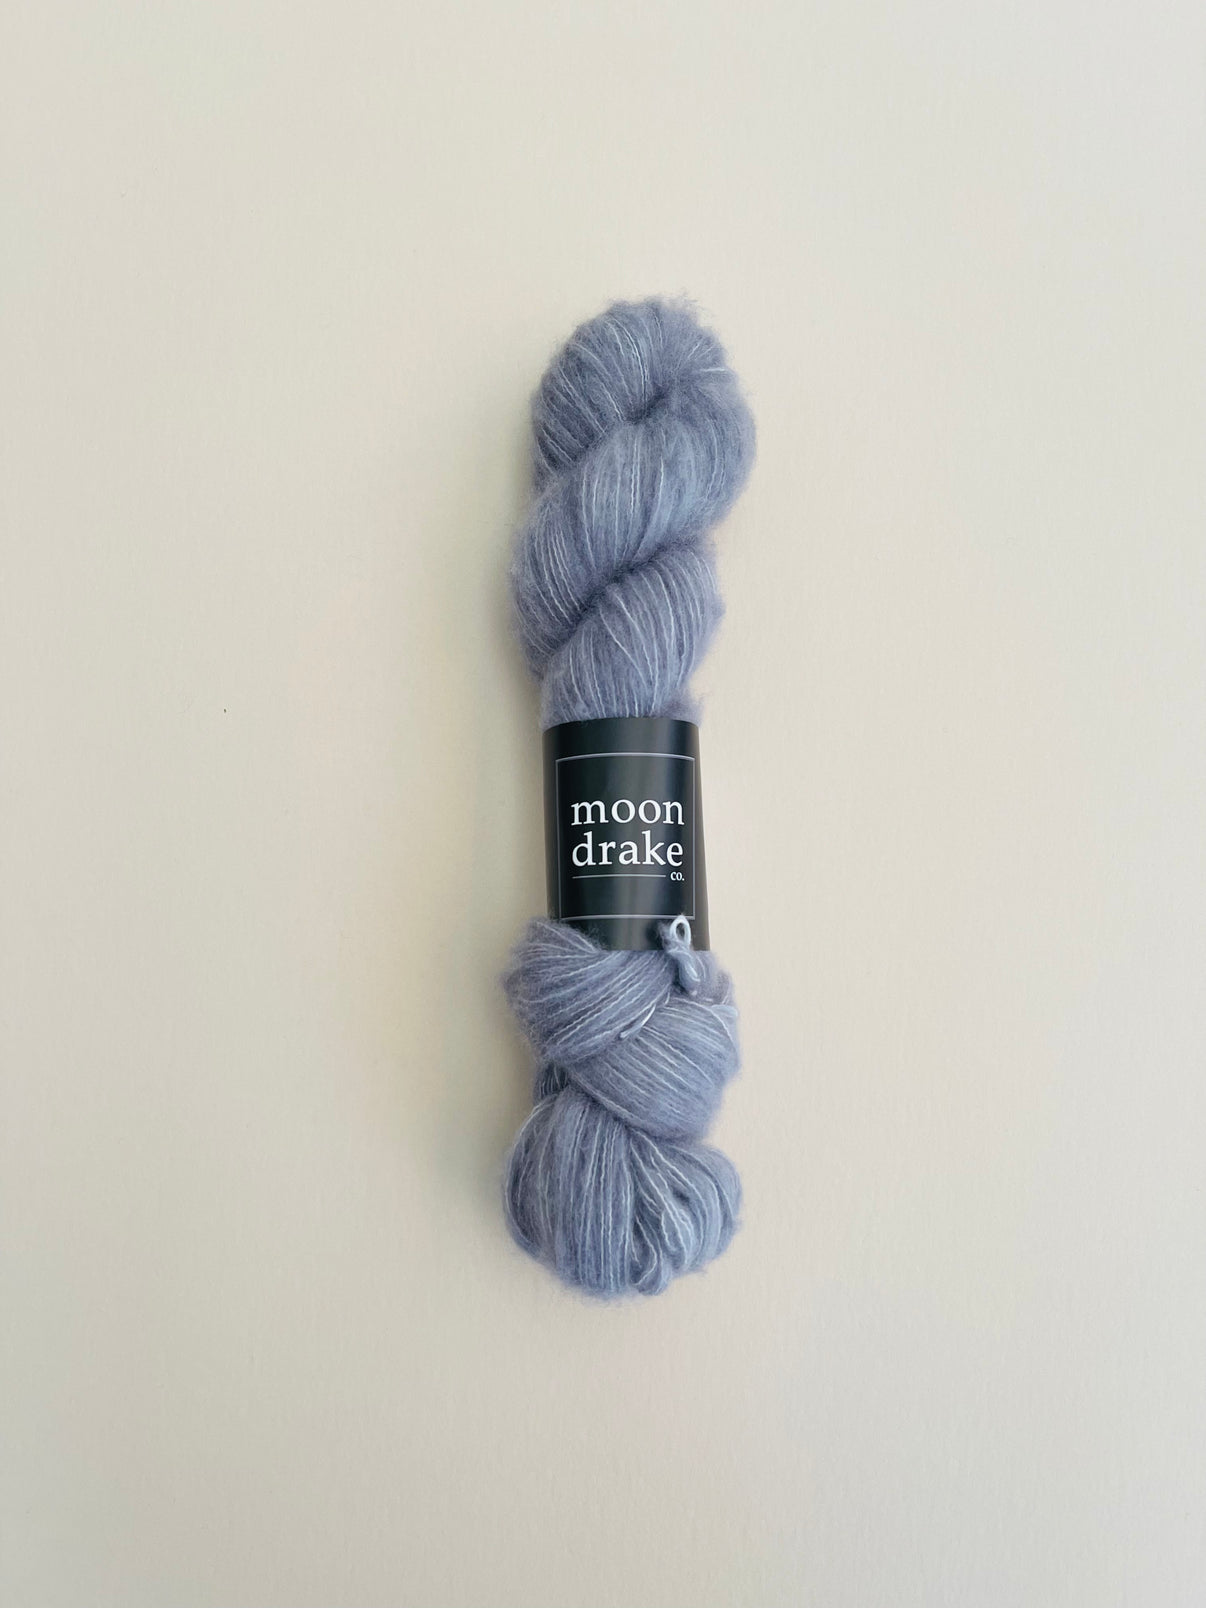 A cool grey skein of fingering weight fuzzy cashmere yarn.